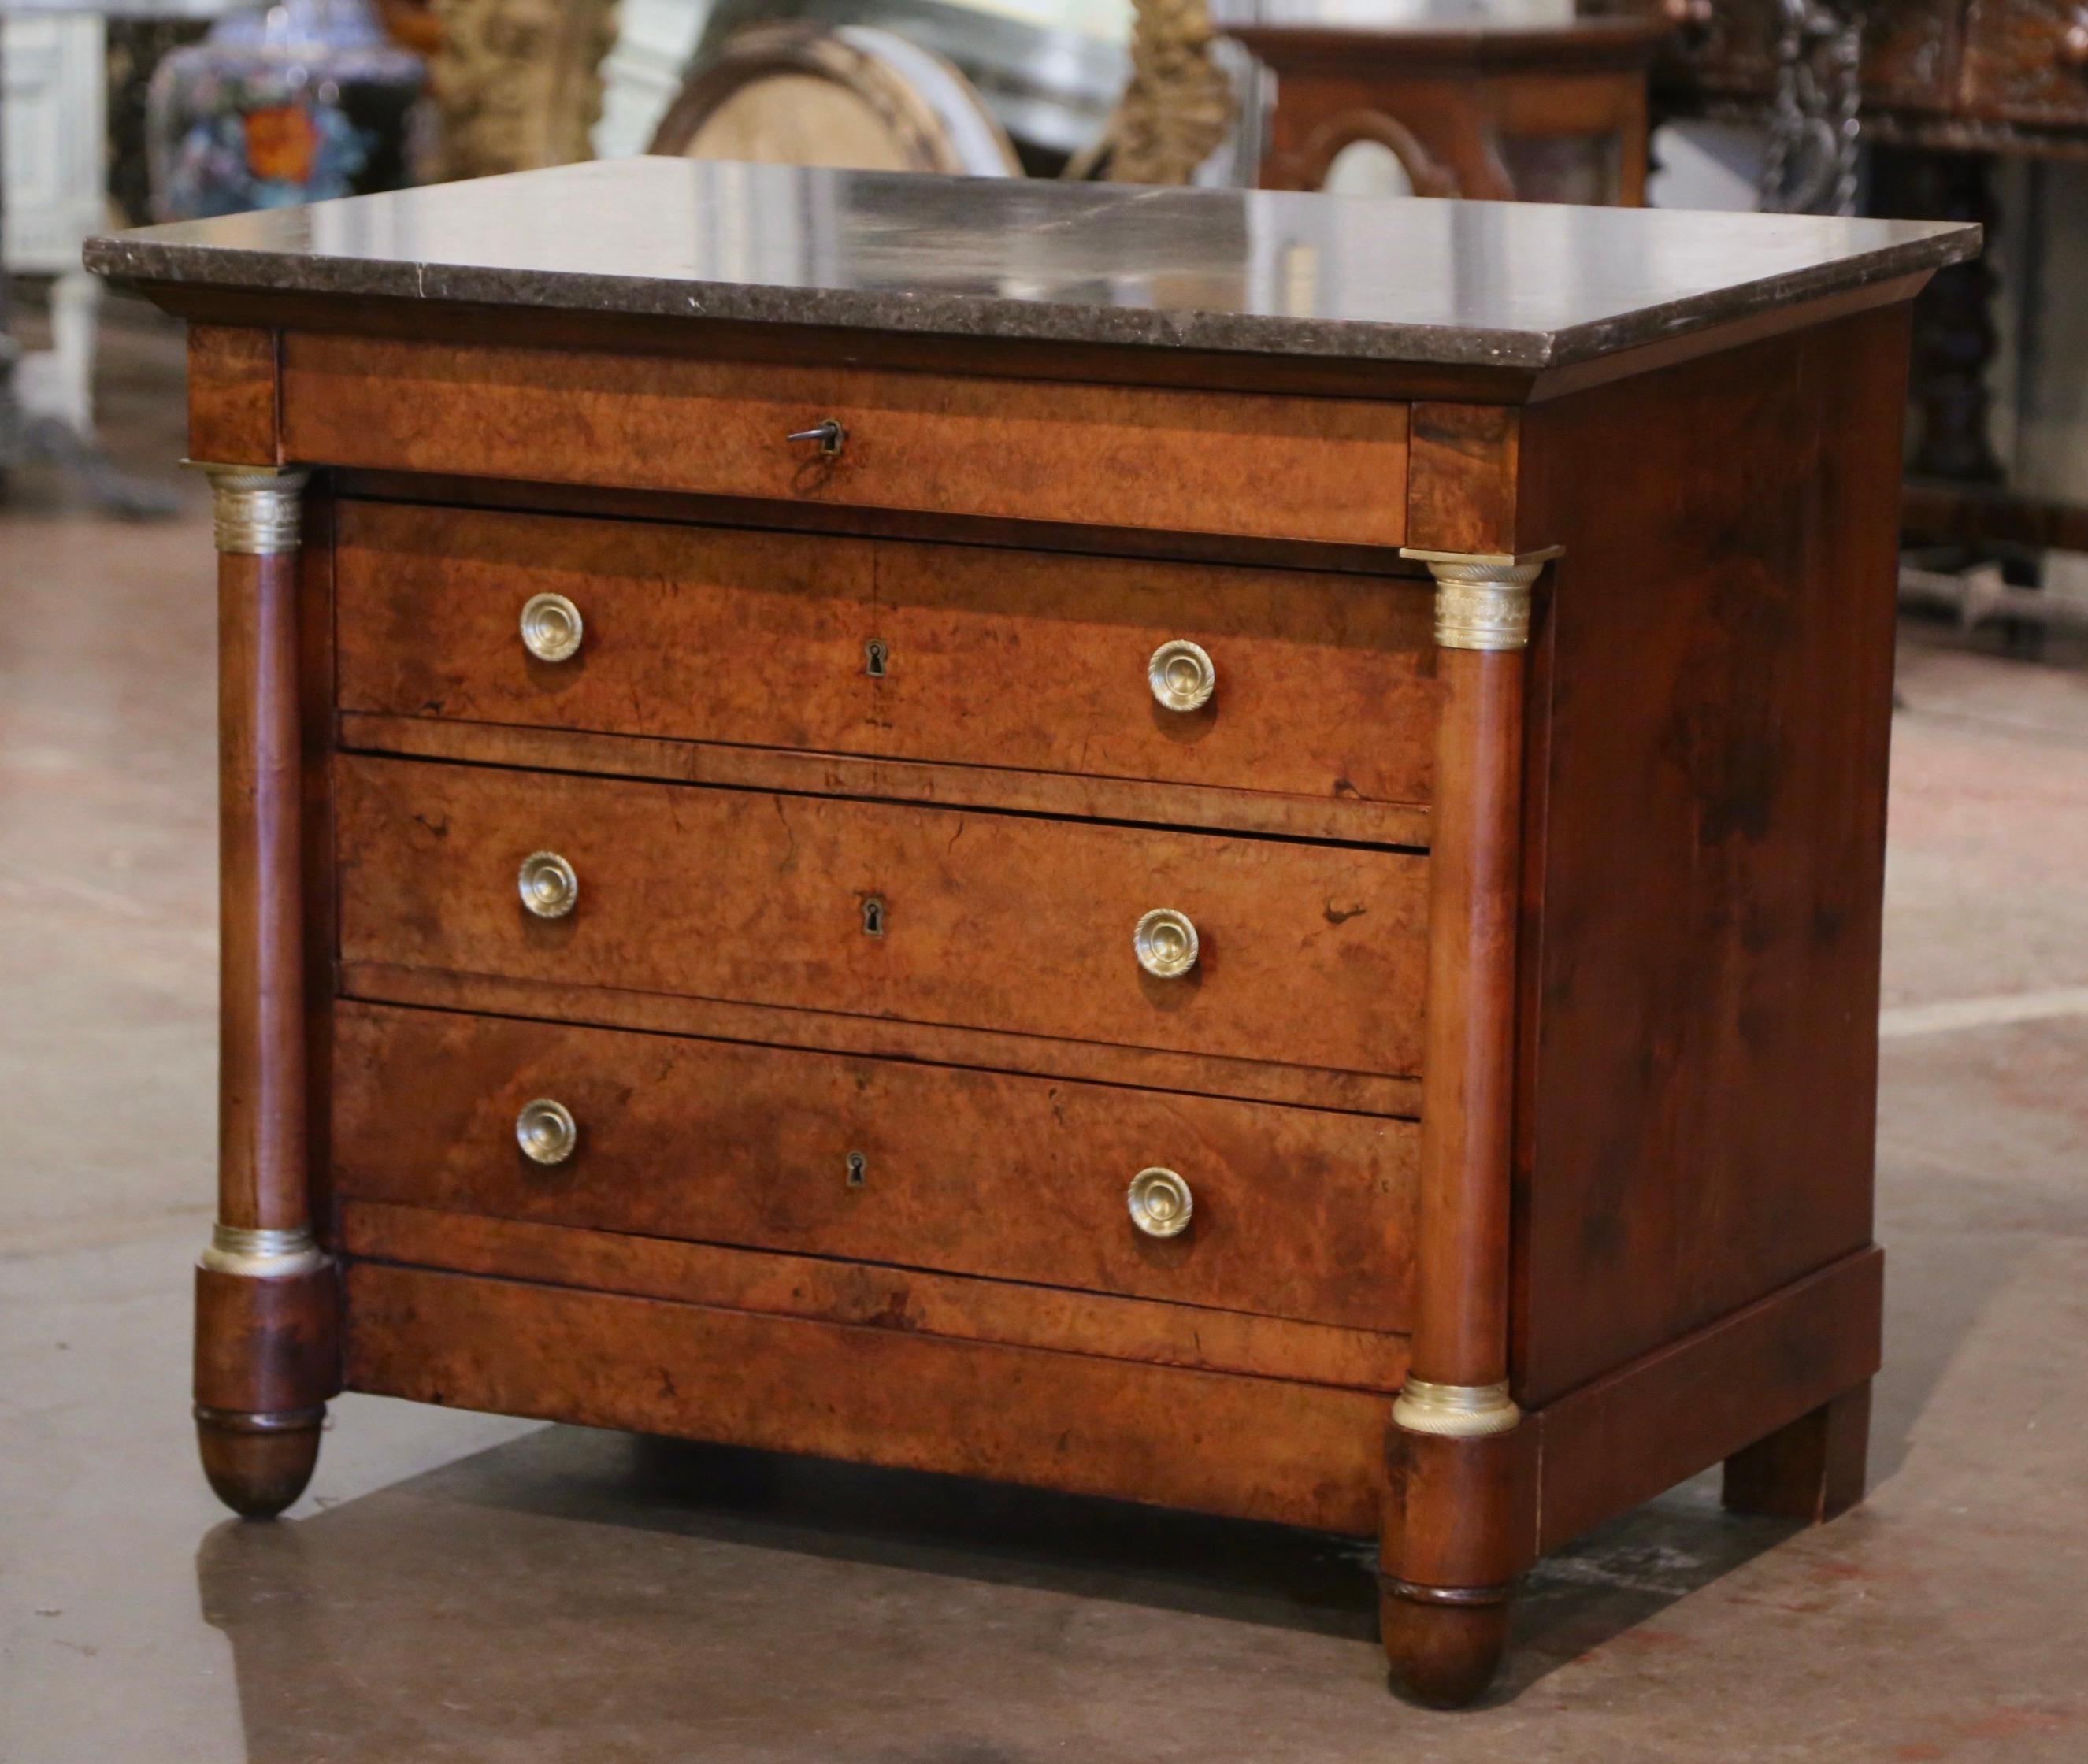 Bronze 19th Century French Empire Marble Top Carved Veneer Elm Commode Chest of Drawers For Sale